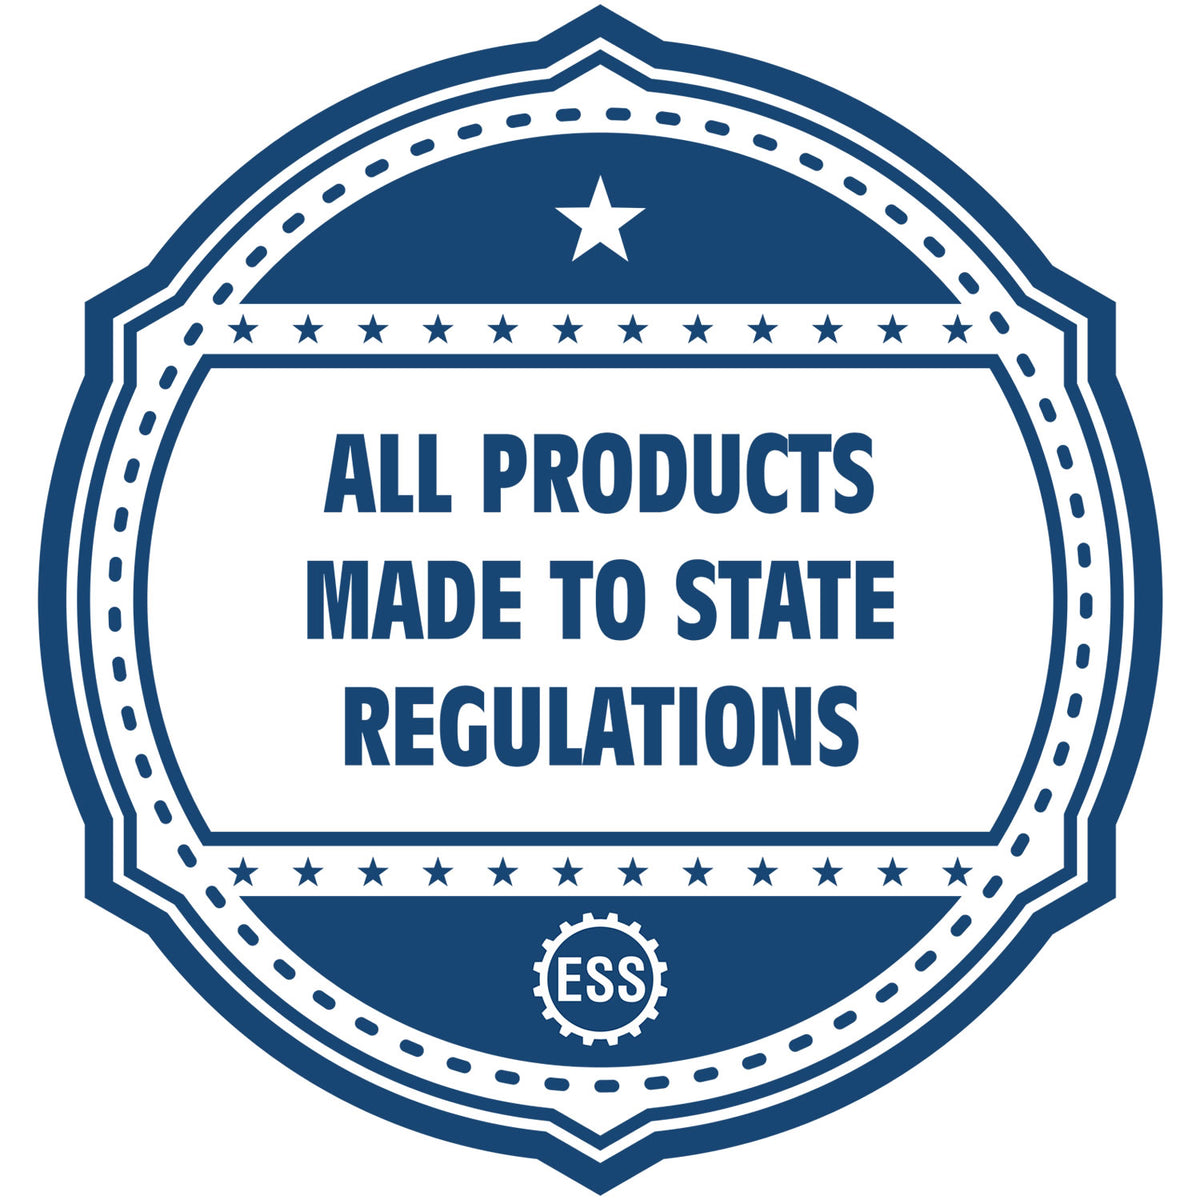 An icon or badge element for the State of Kentucky Long Reach Architectural Embossing Seal showing that this product is made in compliance with state regulations.